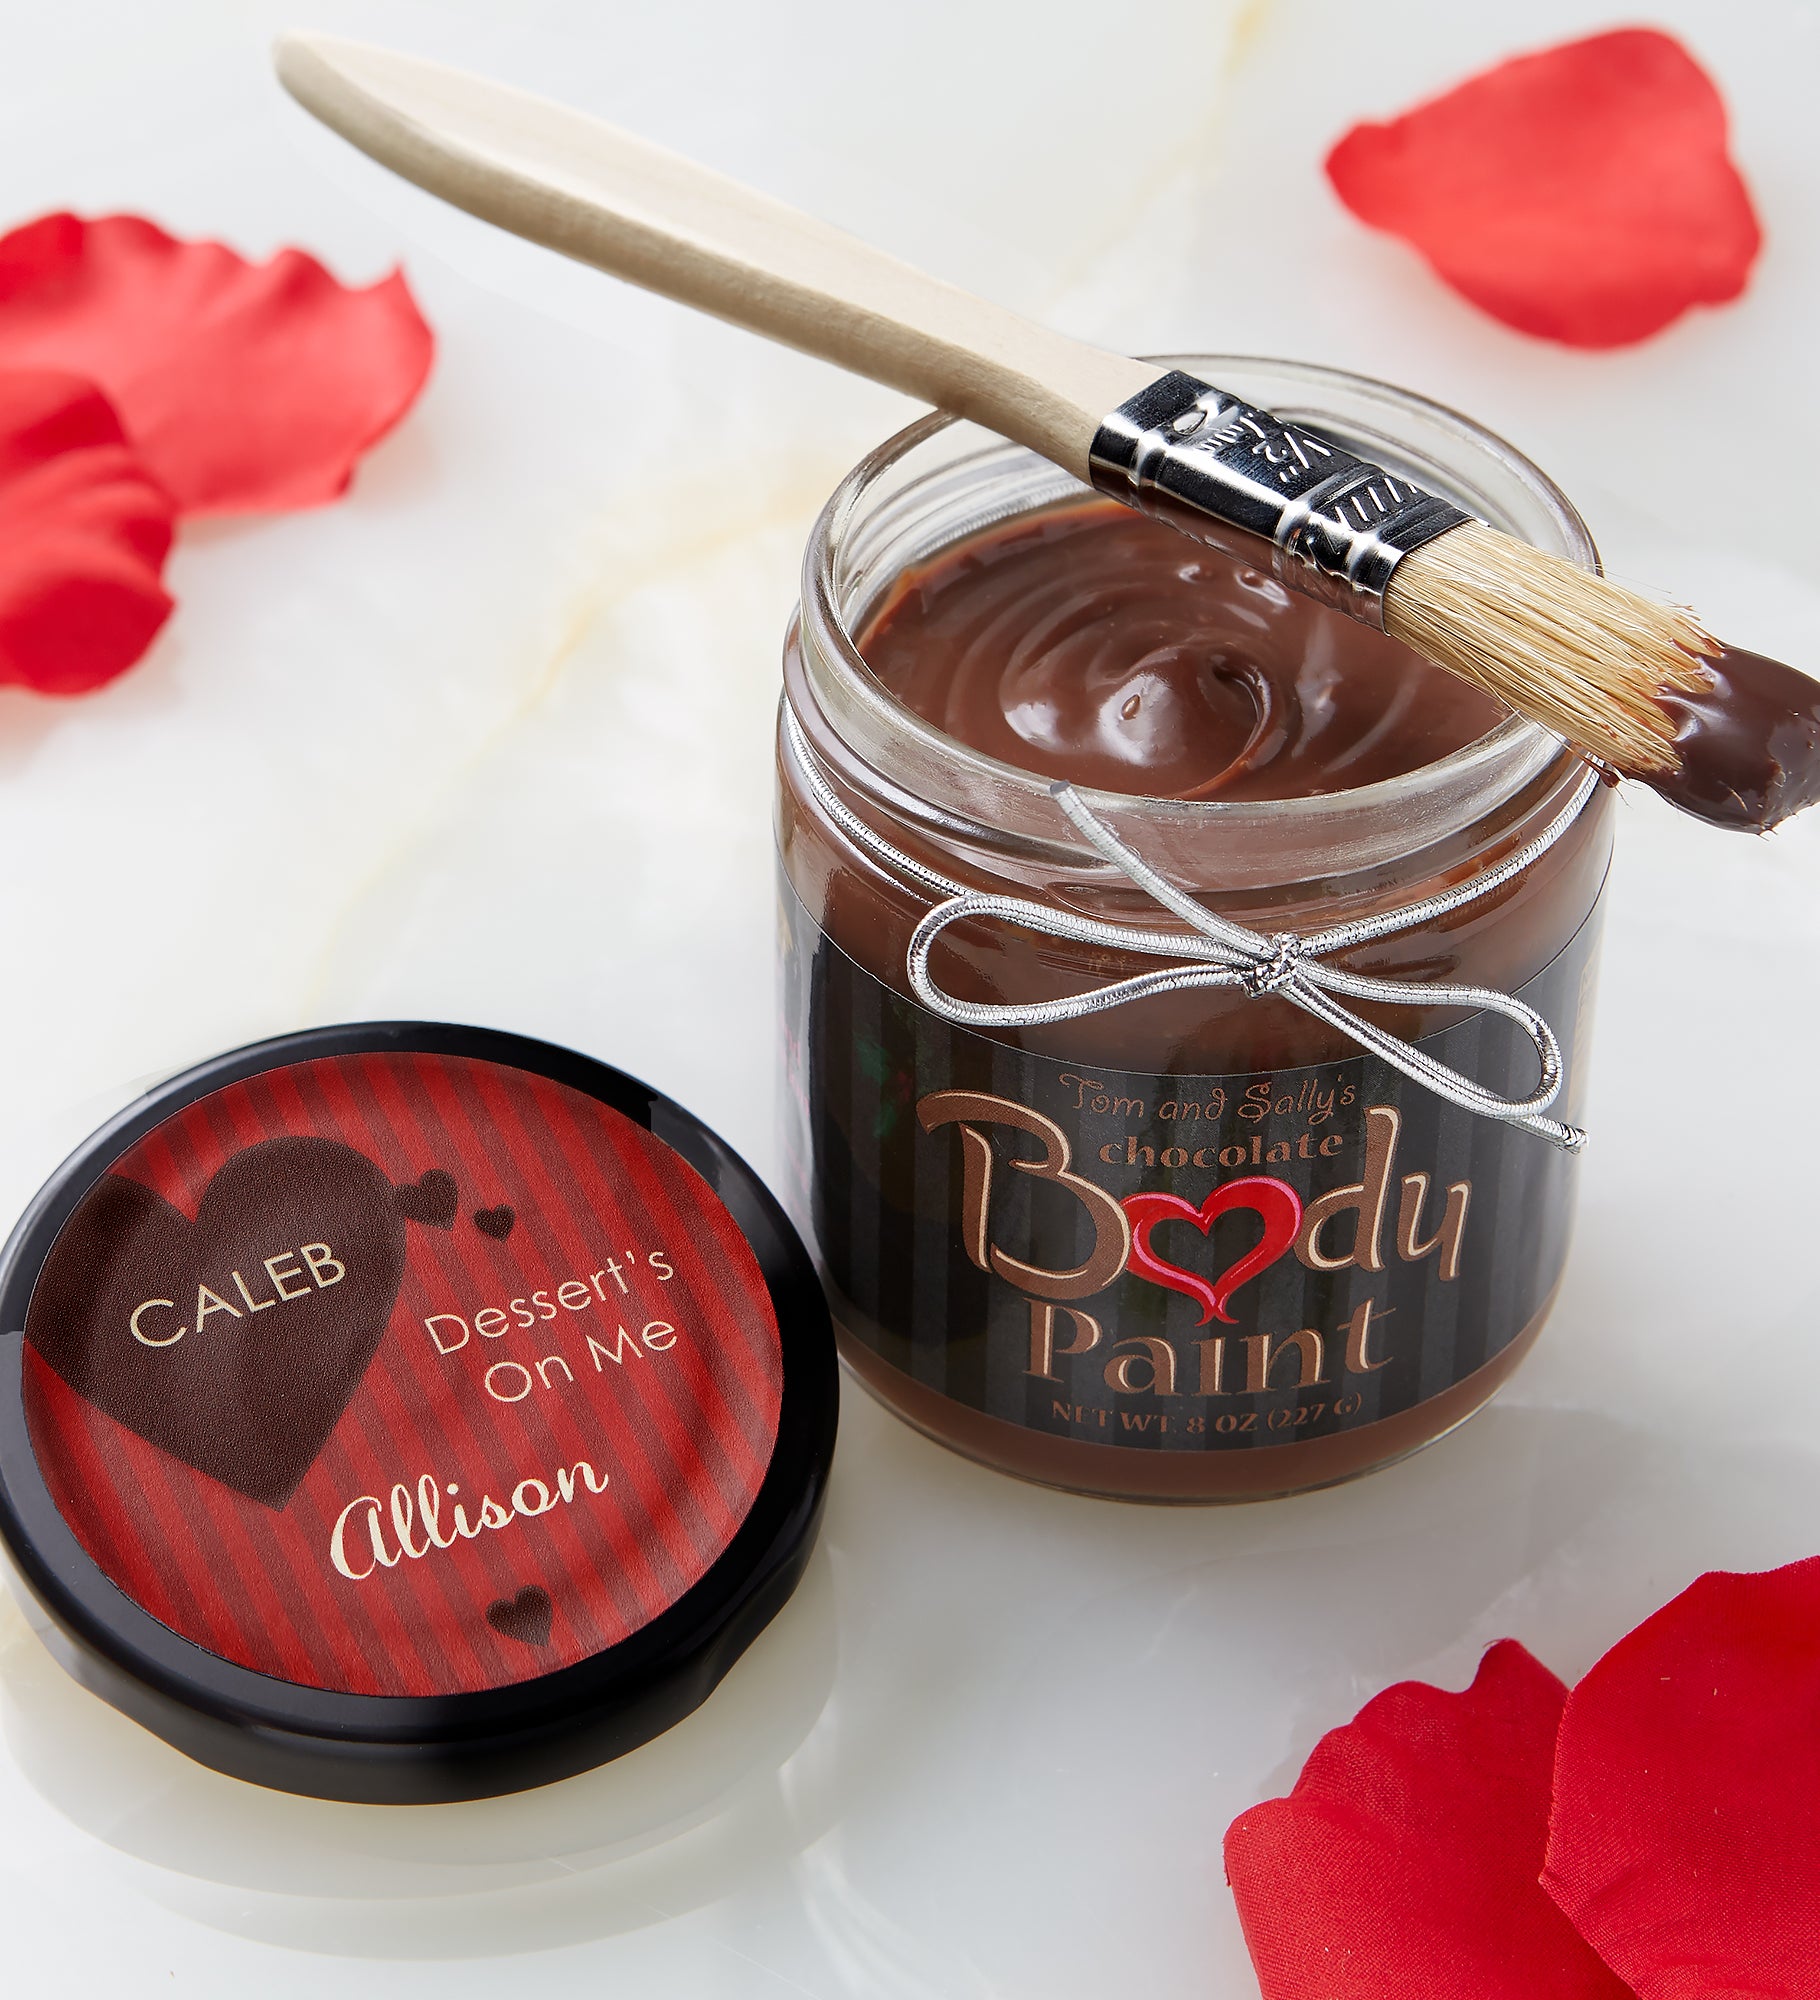 Dessert's On Me! Personalized Chocolate Body Paint 